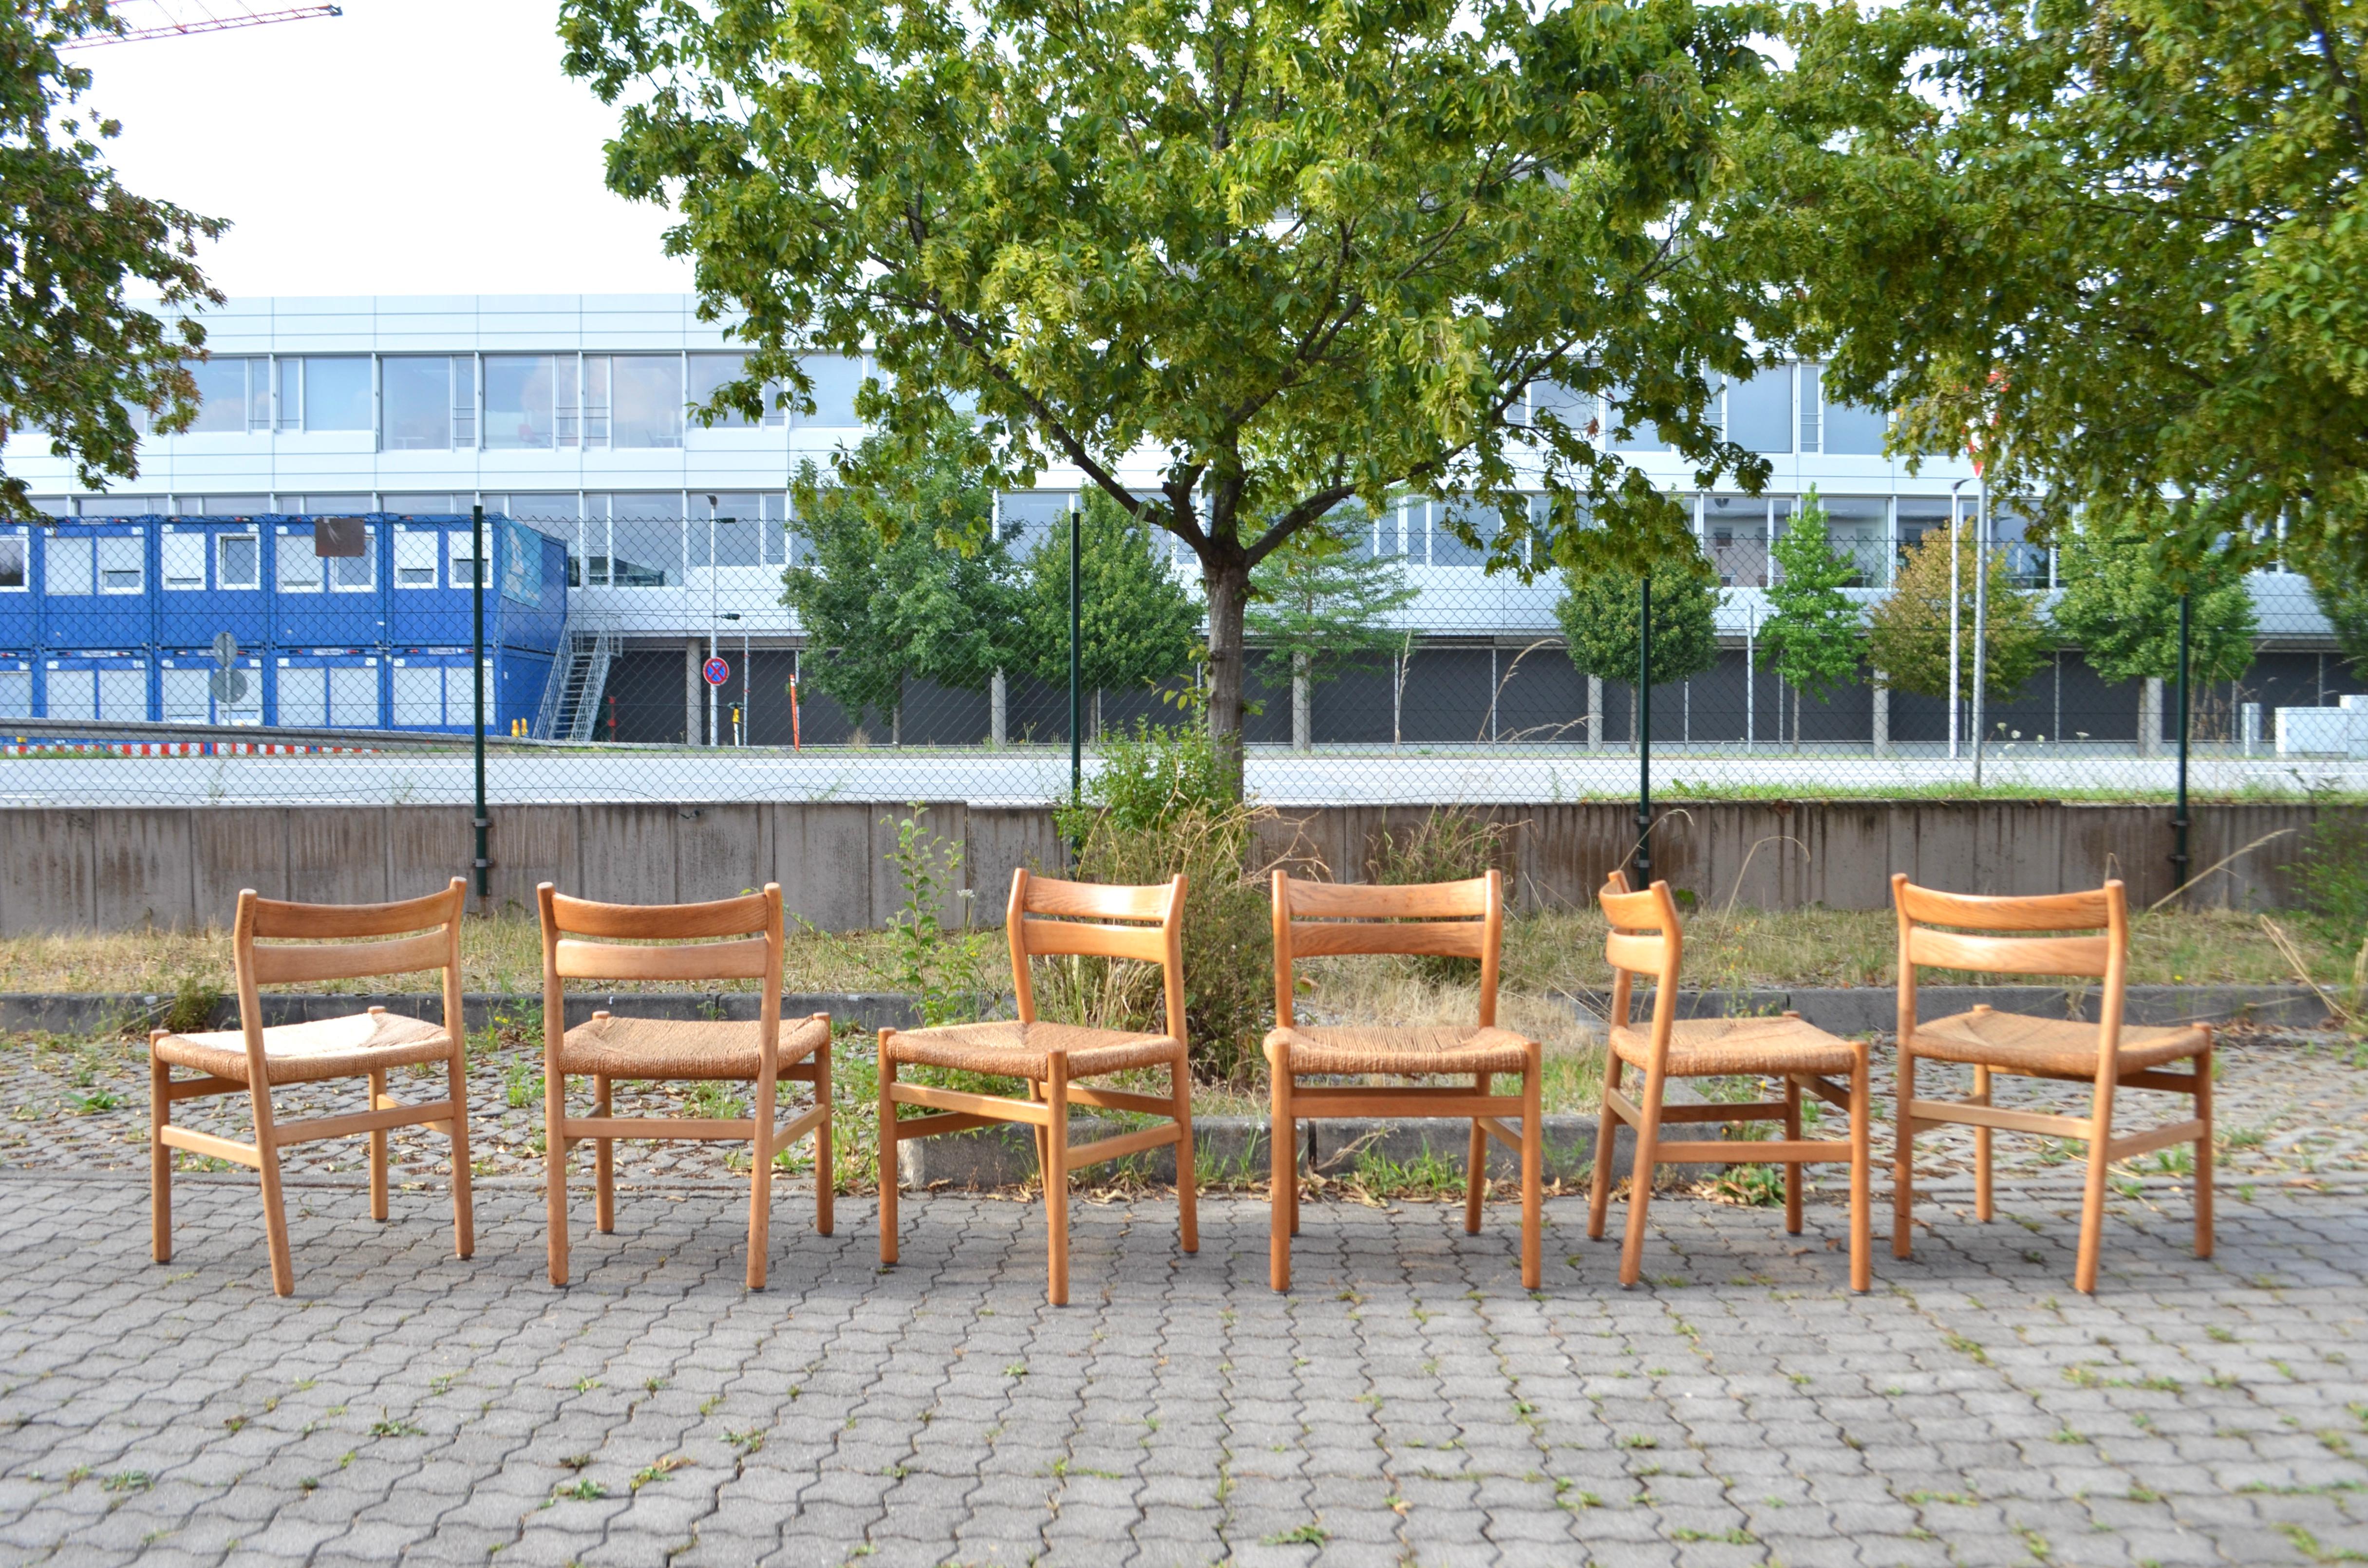 This set of 6 Model BM1 Chairs.
It was designed  1958 by Børge Mogensen and produced by C.M.Madssn Fabriken.
These chairs are old and the first production.
The design was inspired by the American Shaker furniture. 
It´s made of oiled oak and